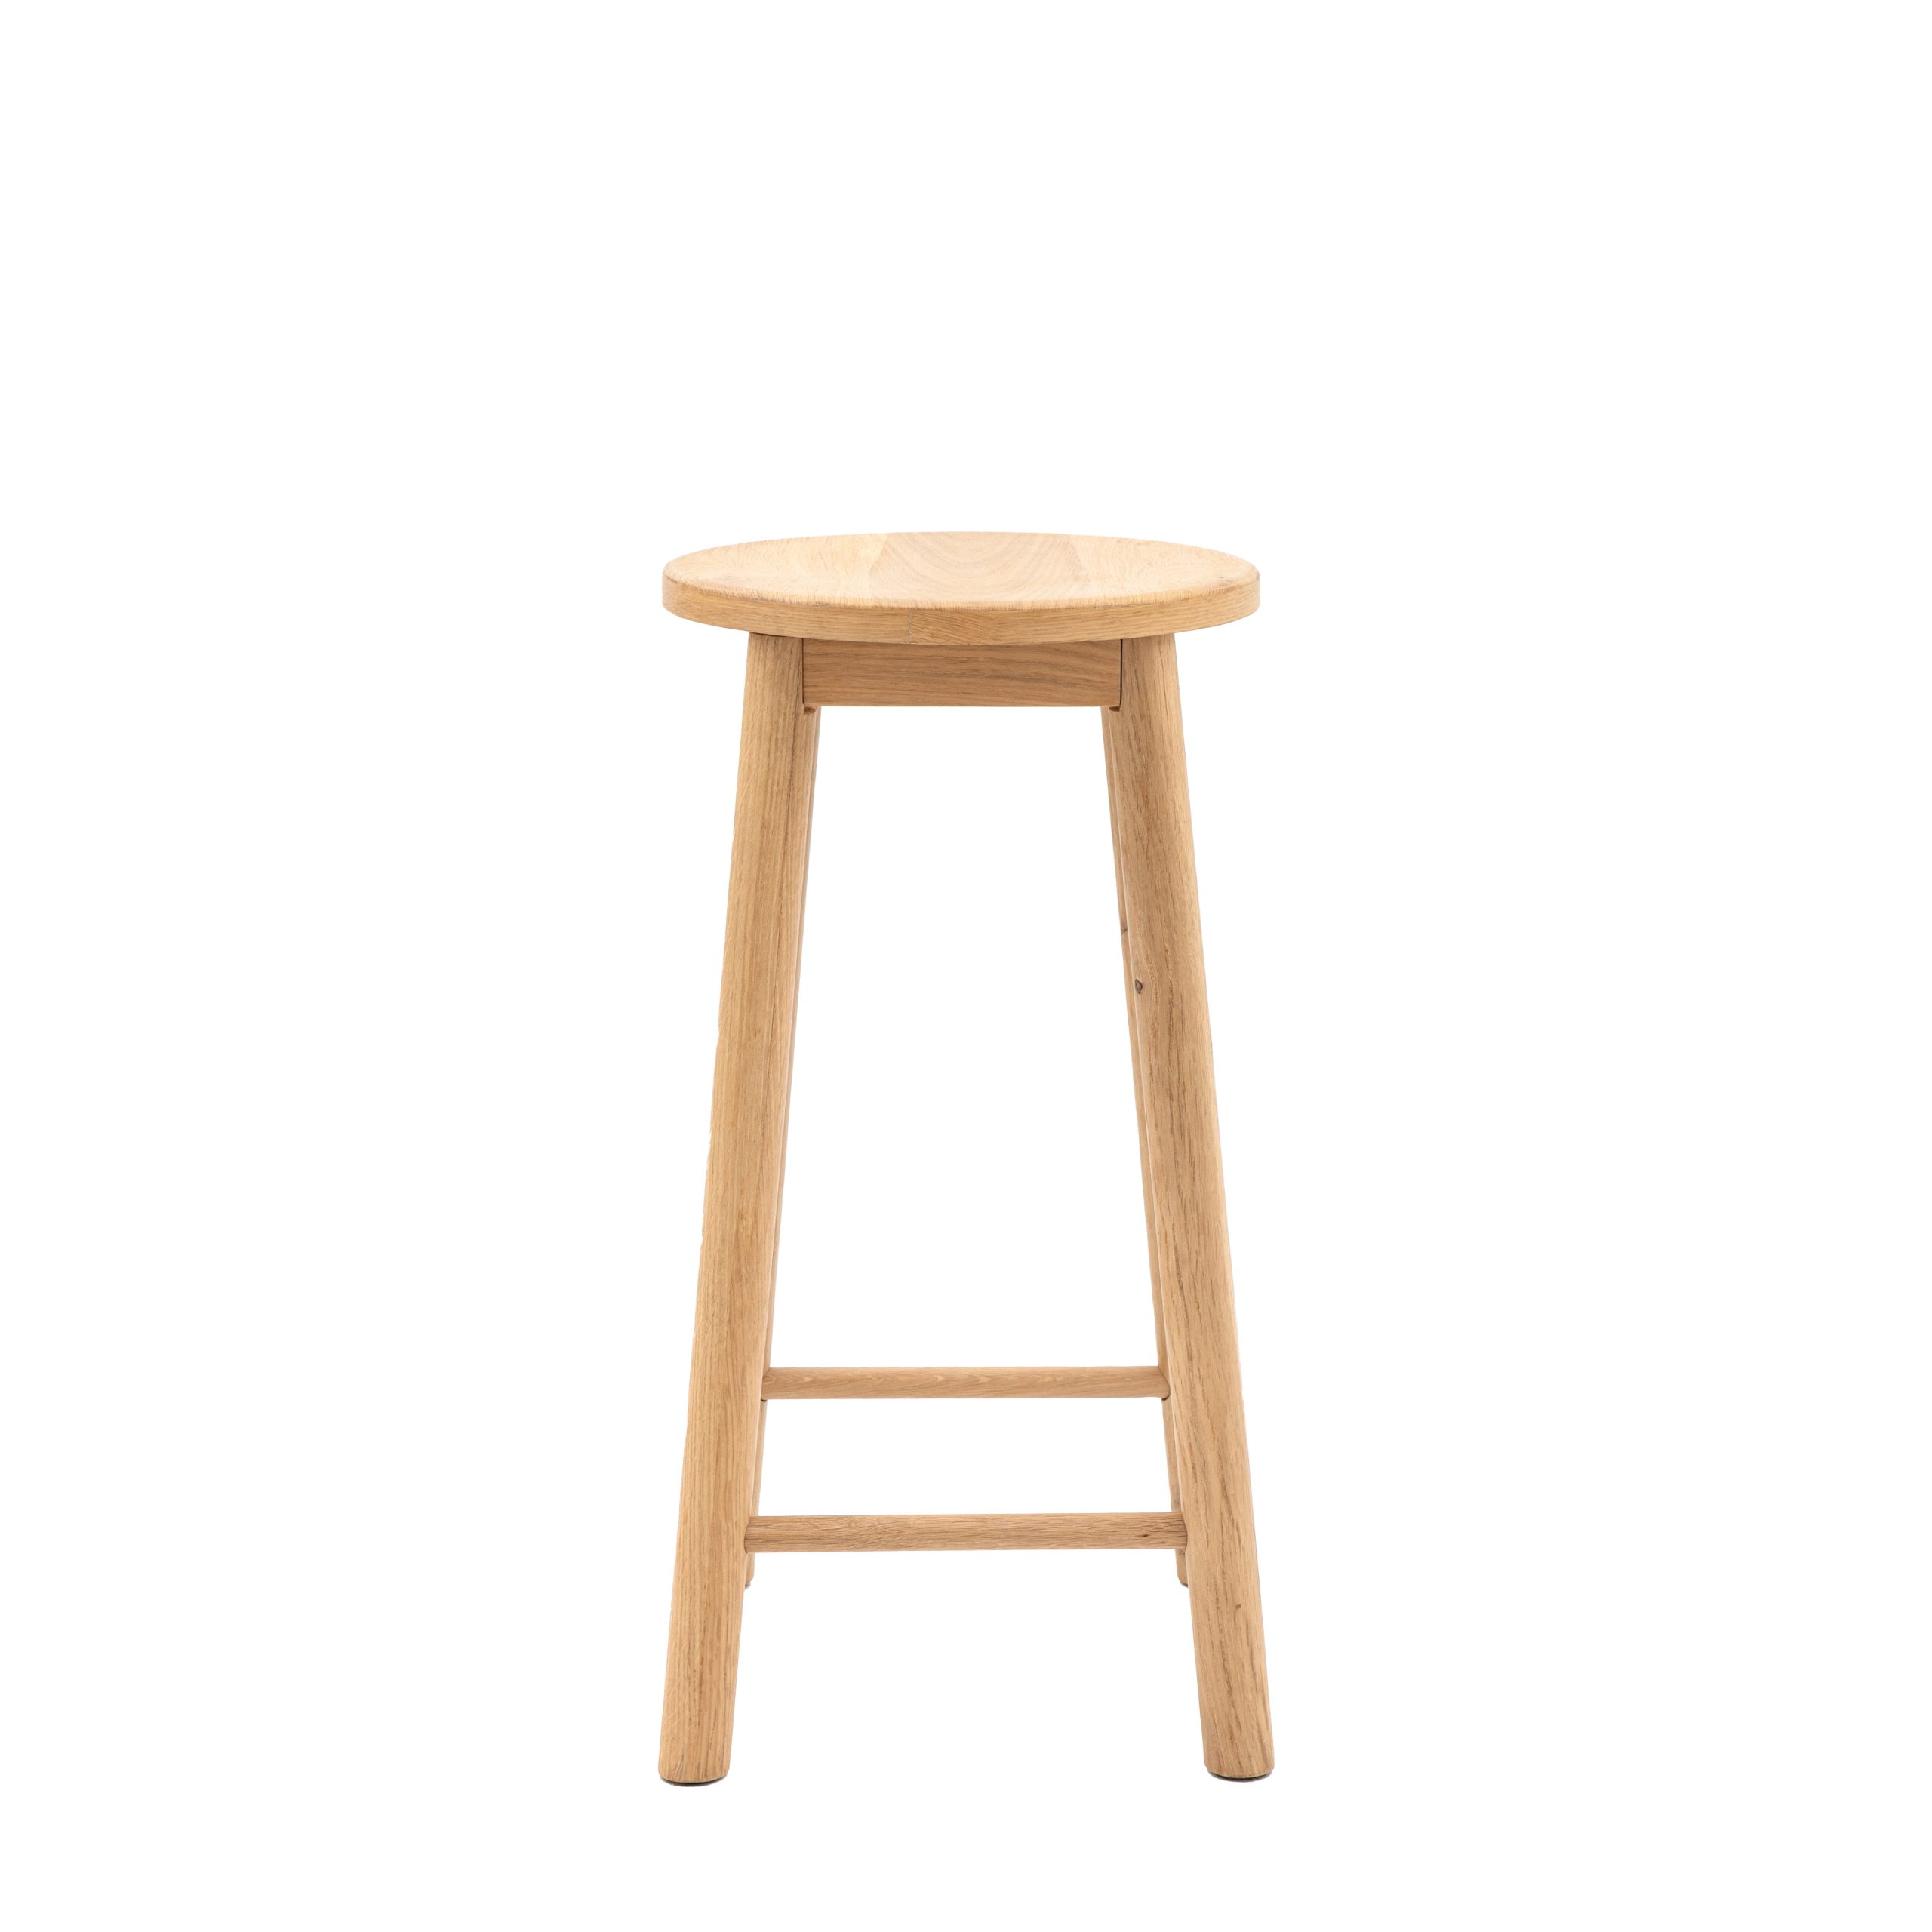 Gallery Direct Hatfield Stool Natural